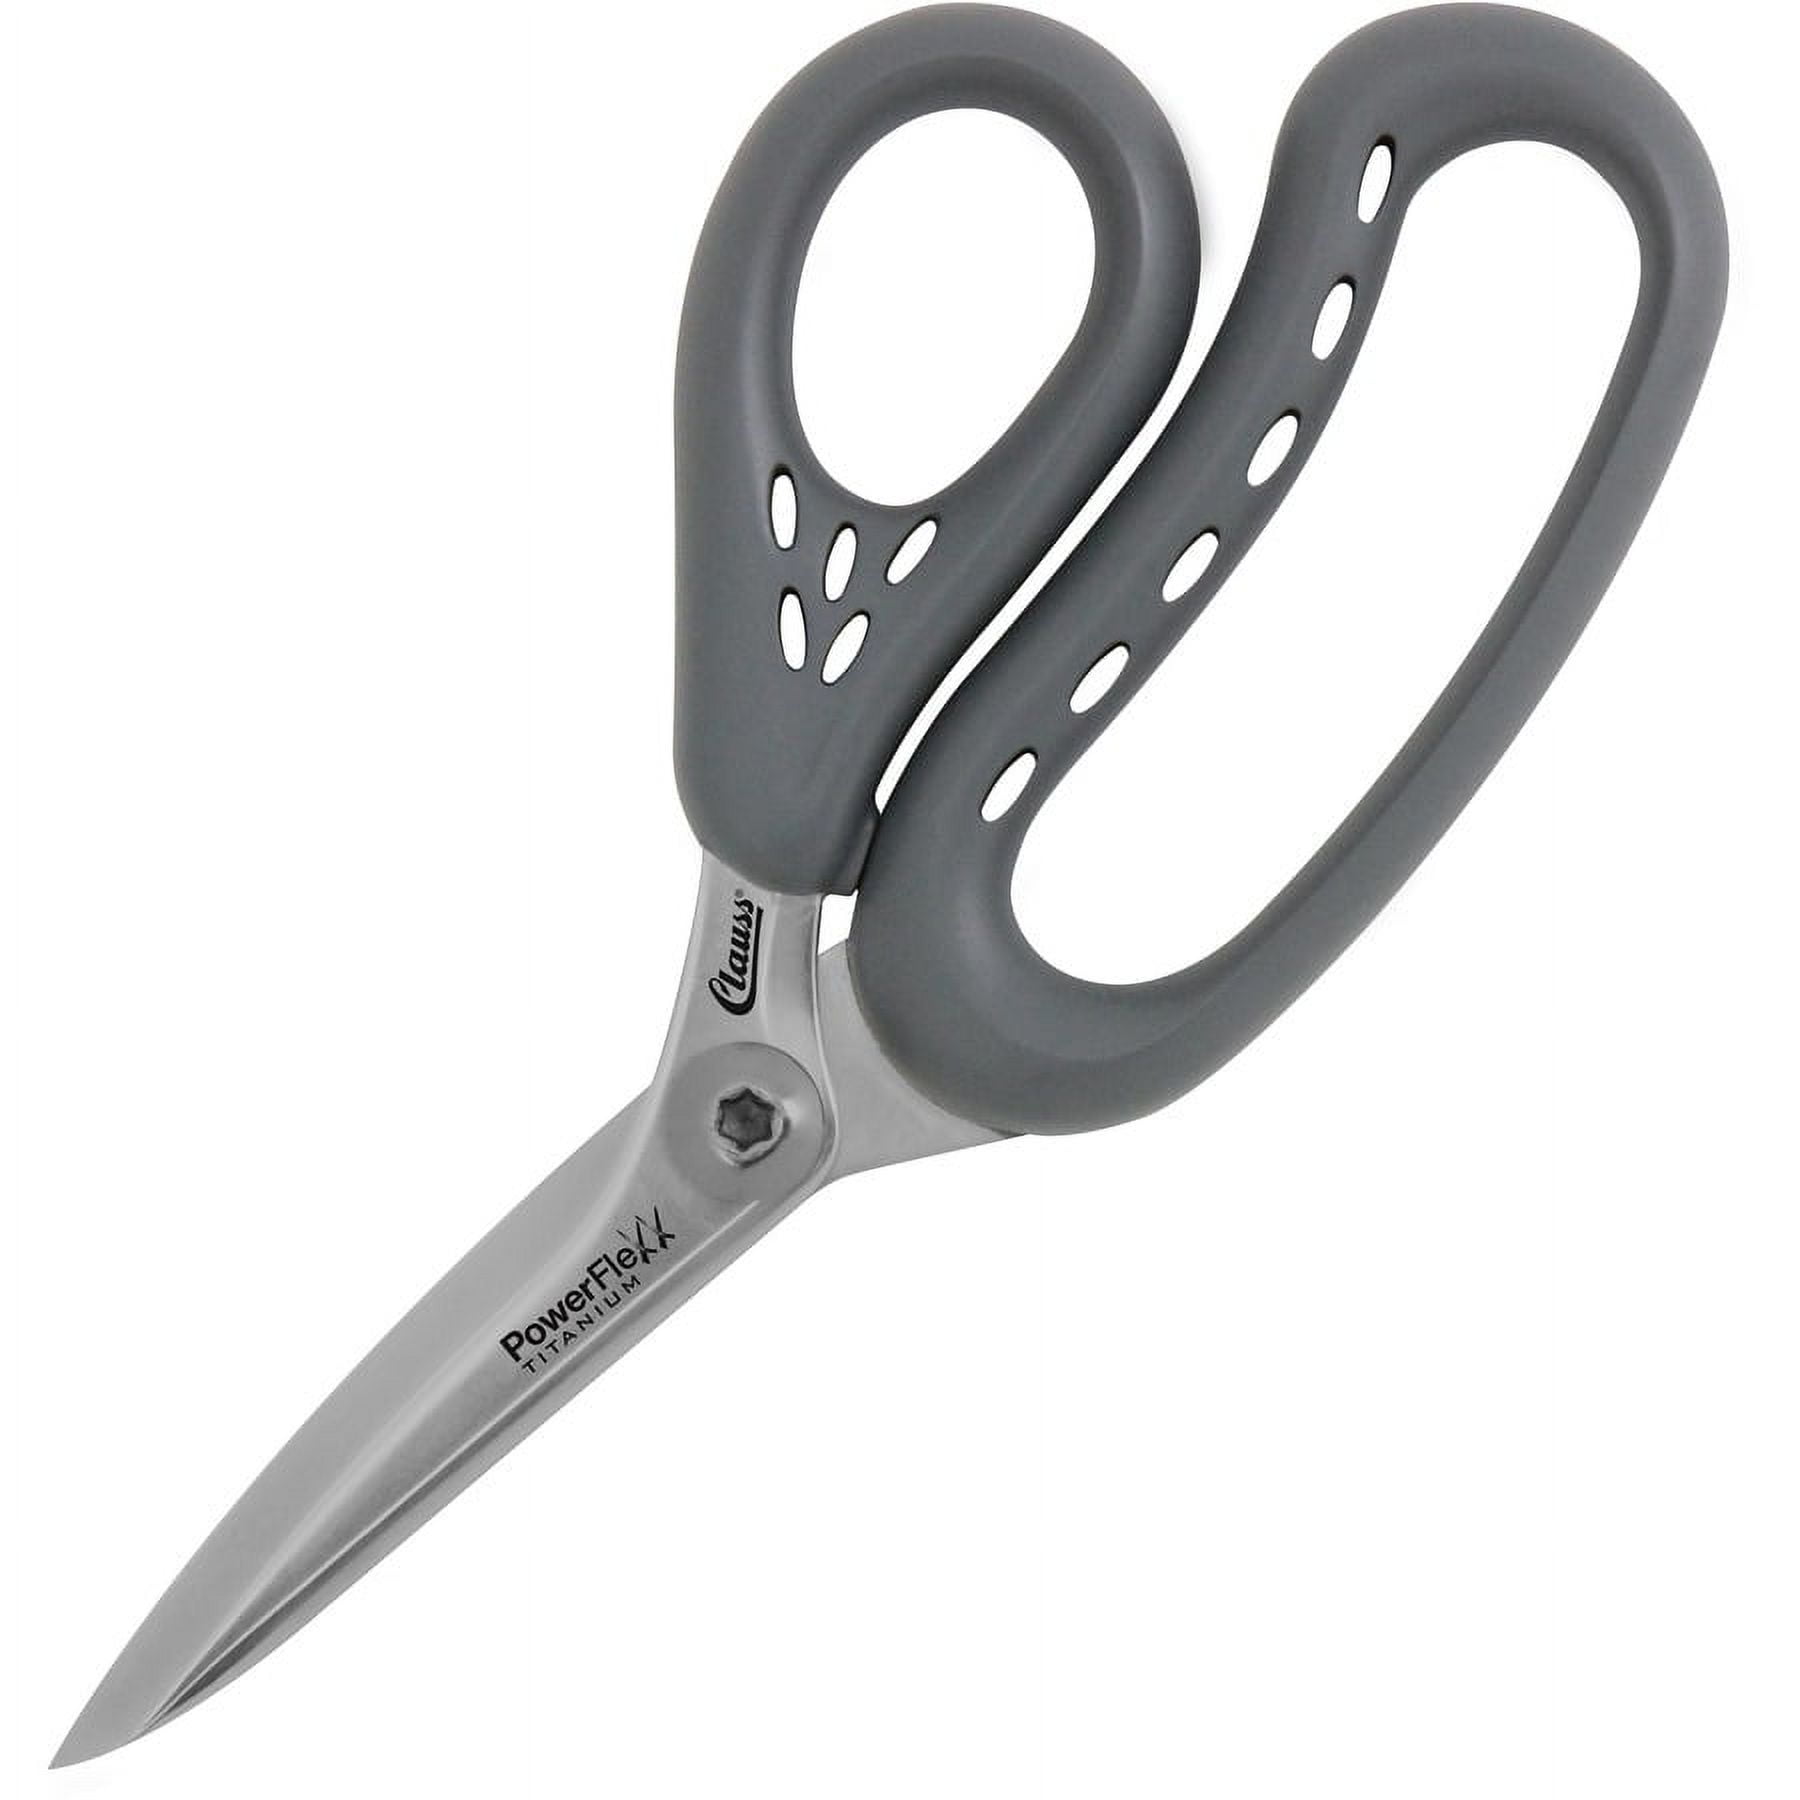 Westcott Titanium Bonded Scissors, 8, Straight, Grey, Yellow, for Office  and School, 1-Count 